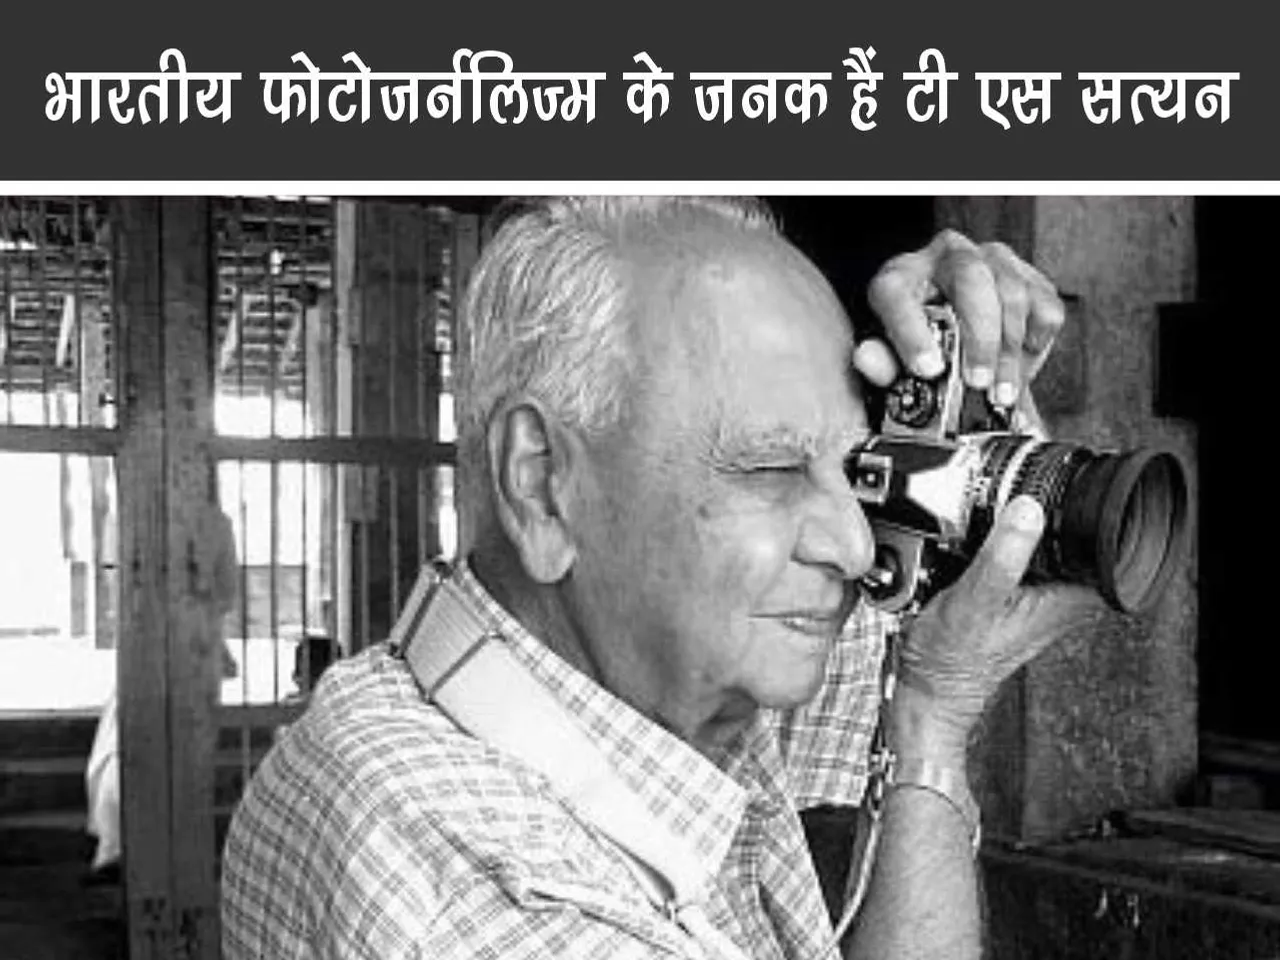 Father of photojournalism in india